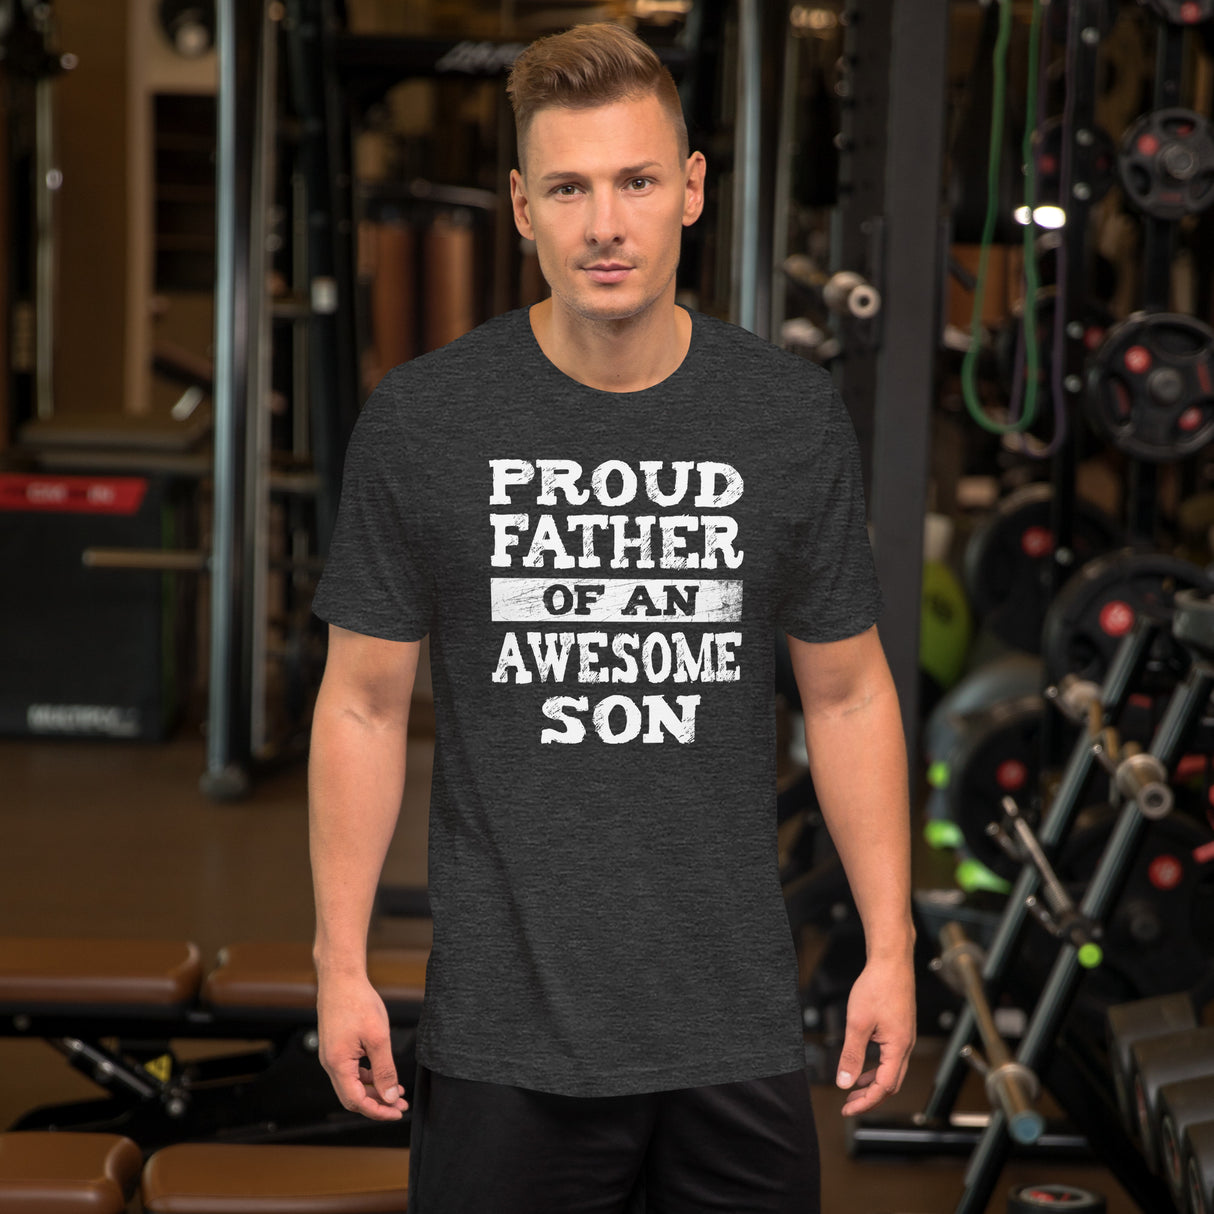 Proud Father of an Awesome Son Shirt